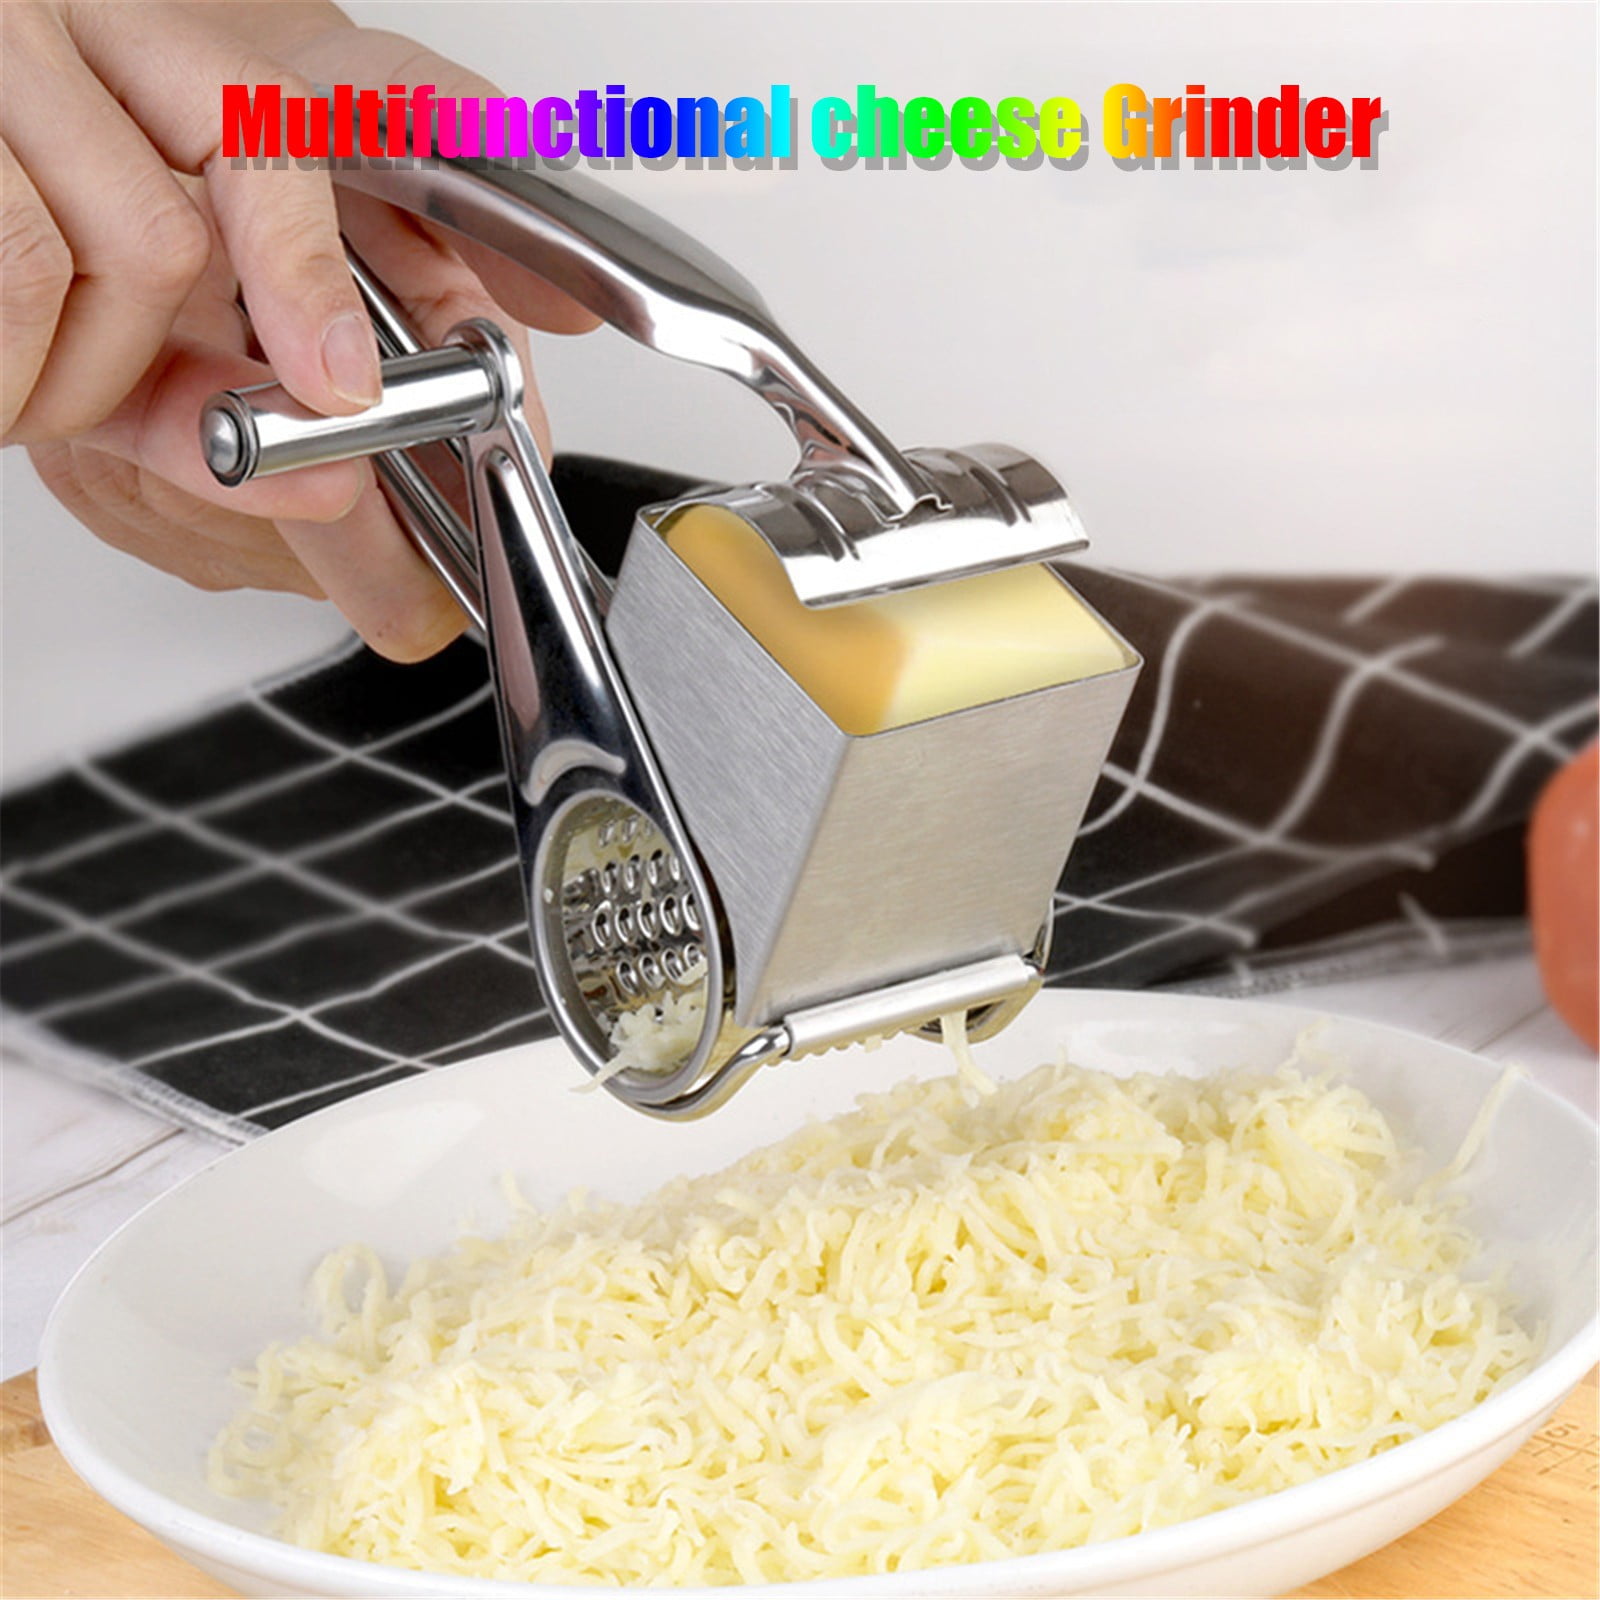 Wqqzjj Kitchen Gadgets Gifts Sale Deals Stainless Steel Cheese Vegetables Grater Rotary Cheese Nut Spice Grater Shredder on Clearance, Size: 8.66*3.54